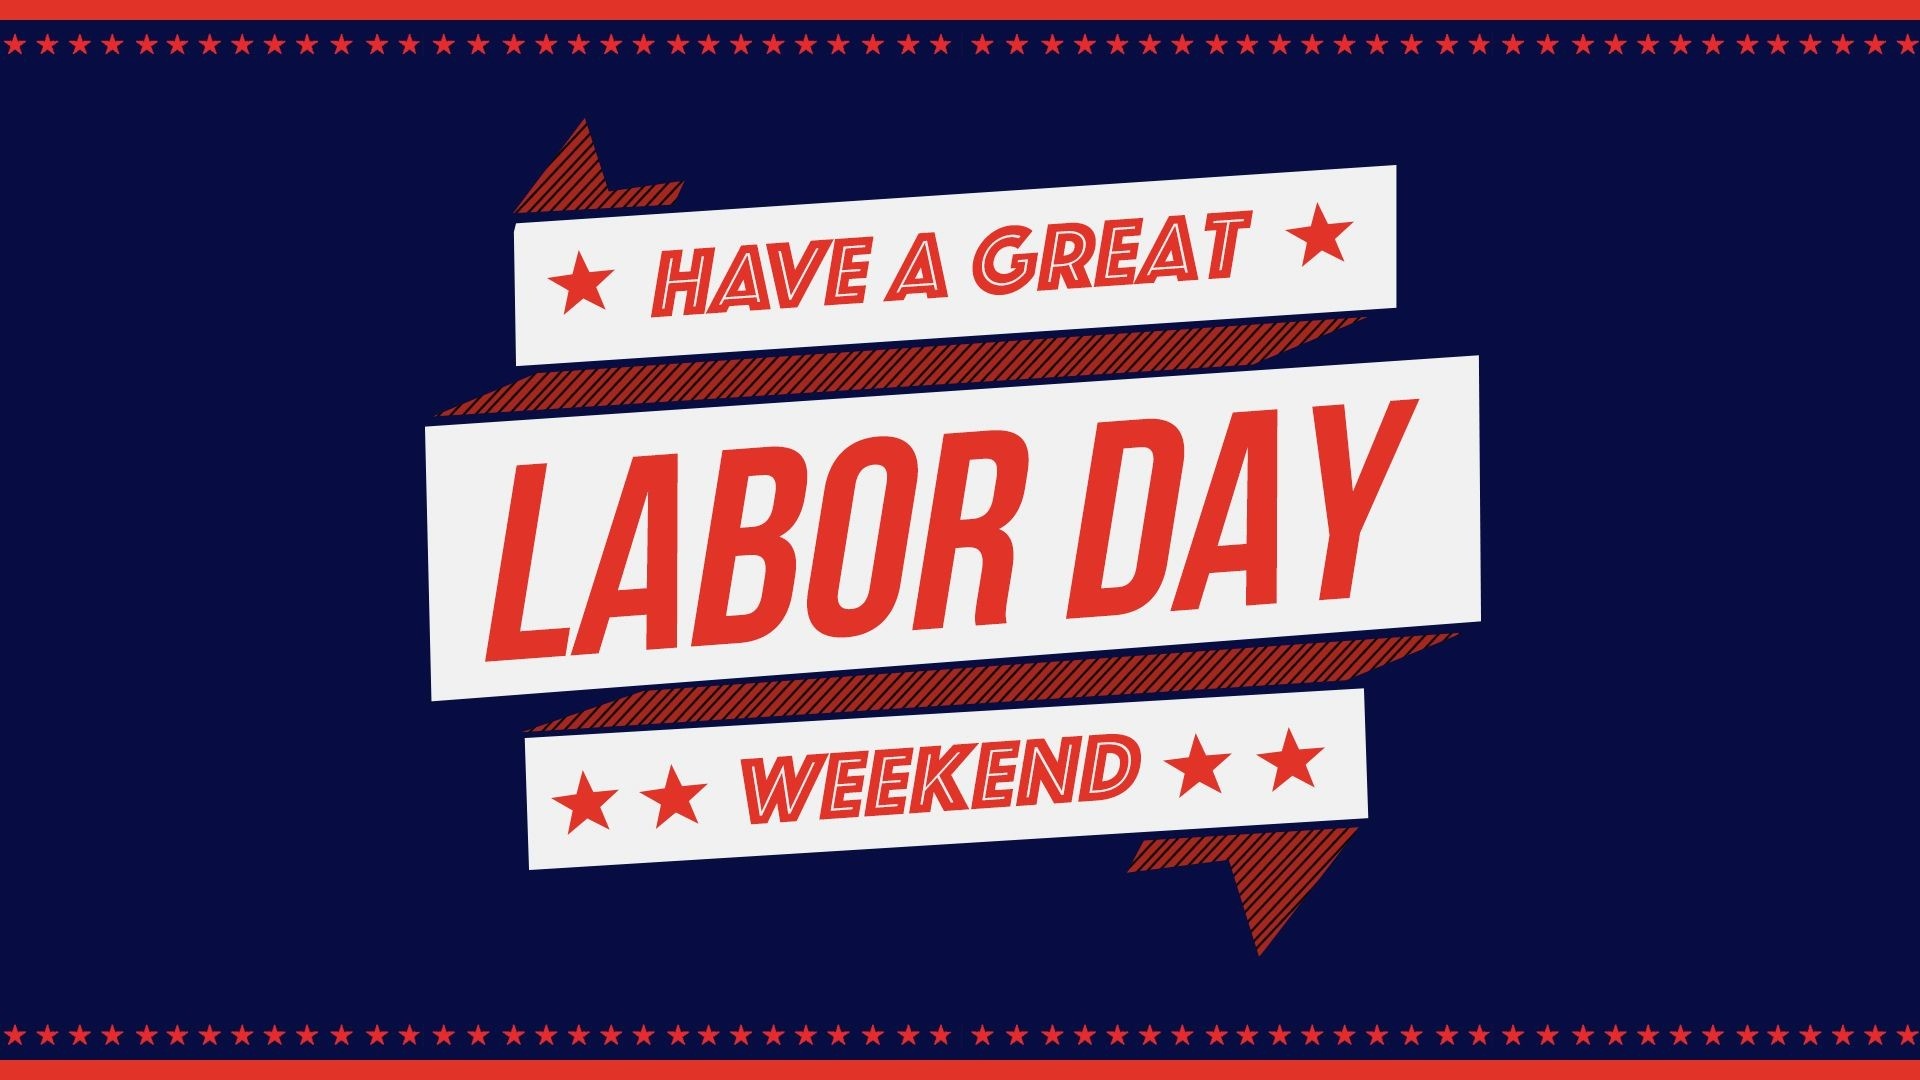 Labor Day Holiday, Labor day wallpaper, 55 pictures, 1920x1080 Full HD Desktop